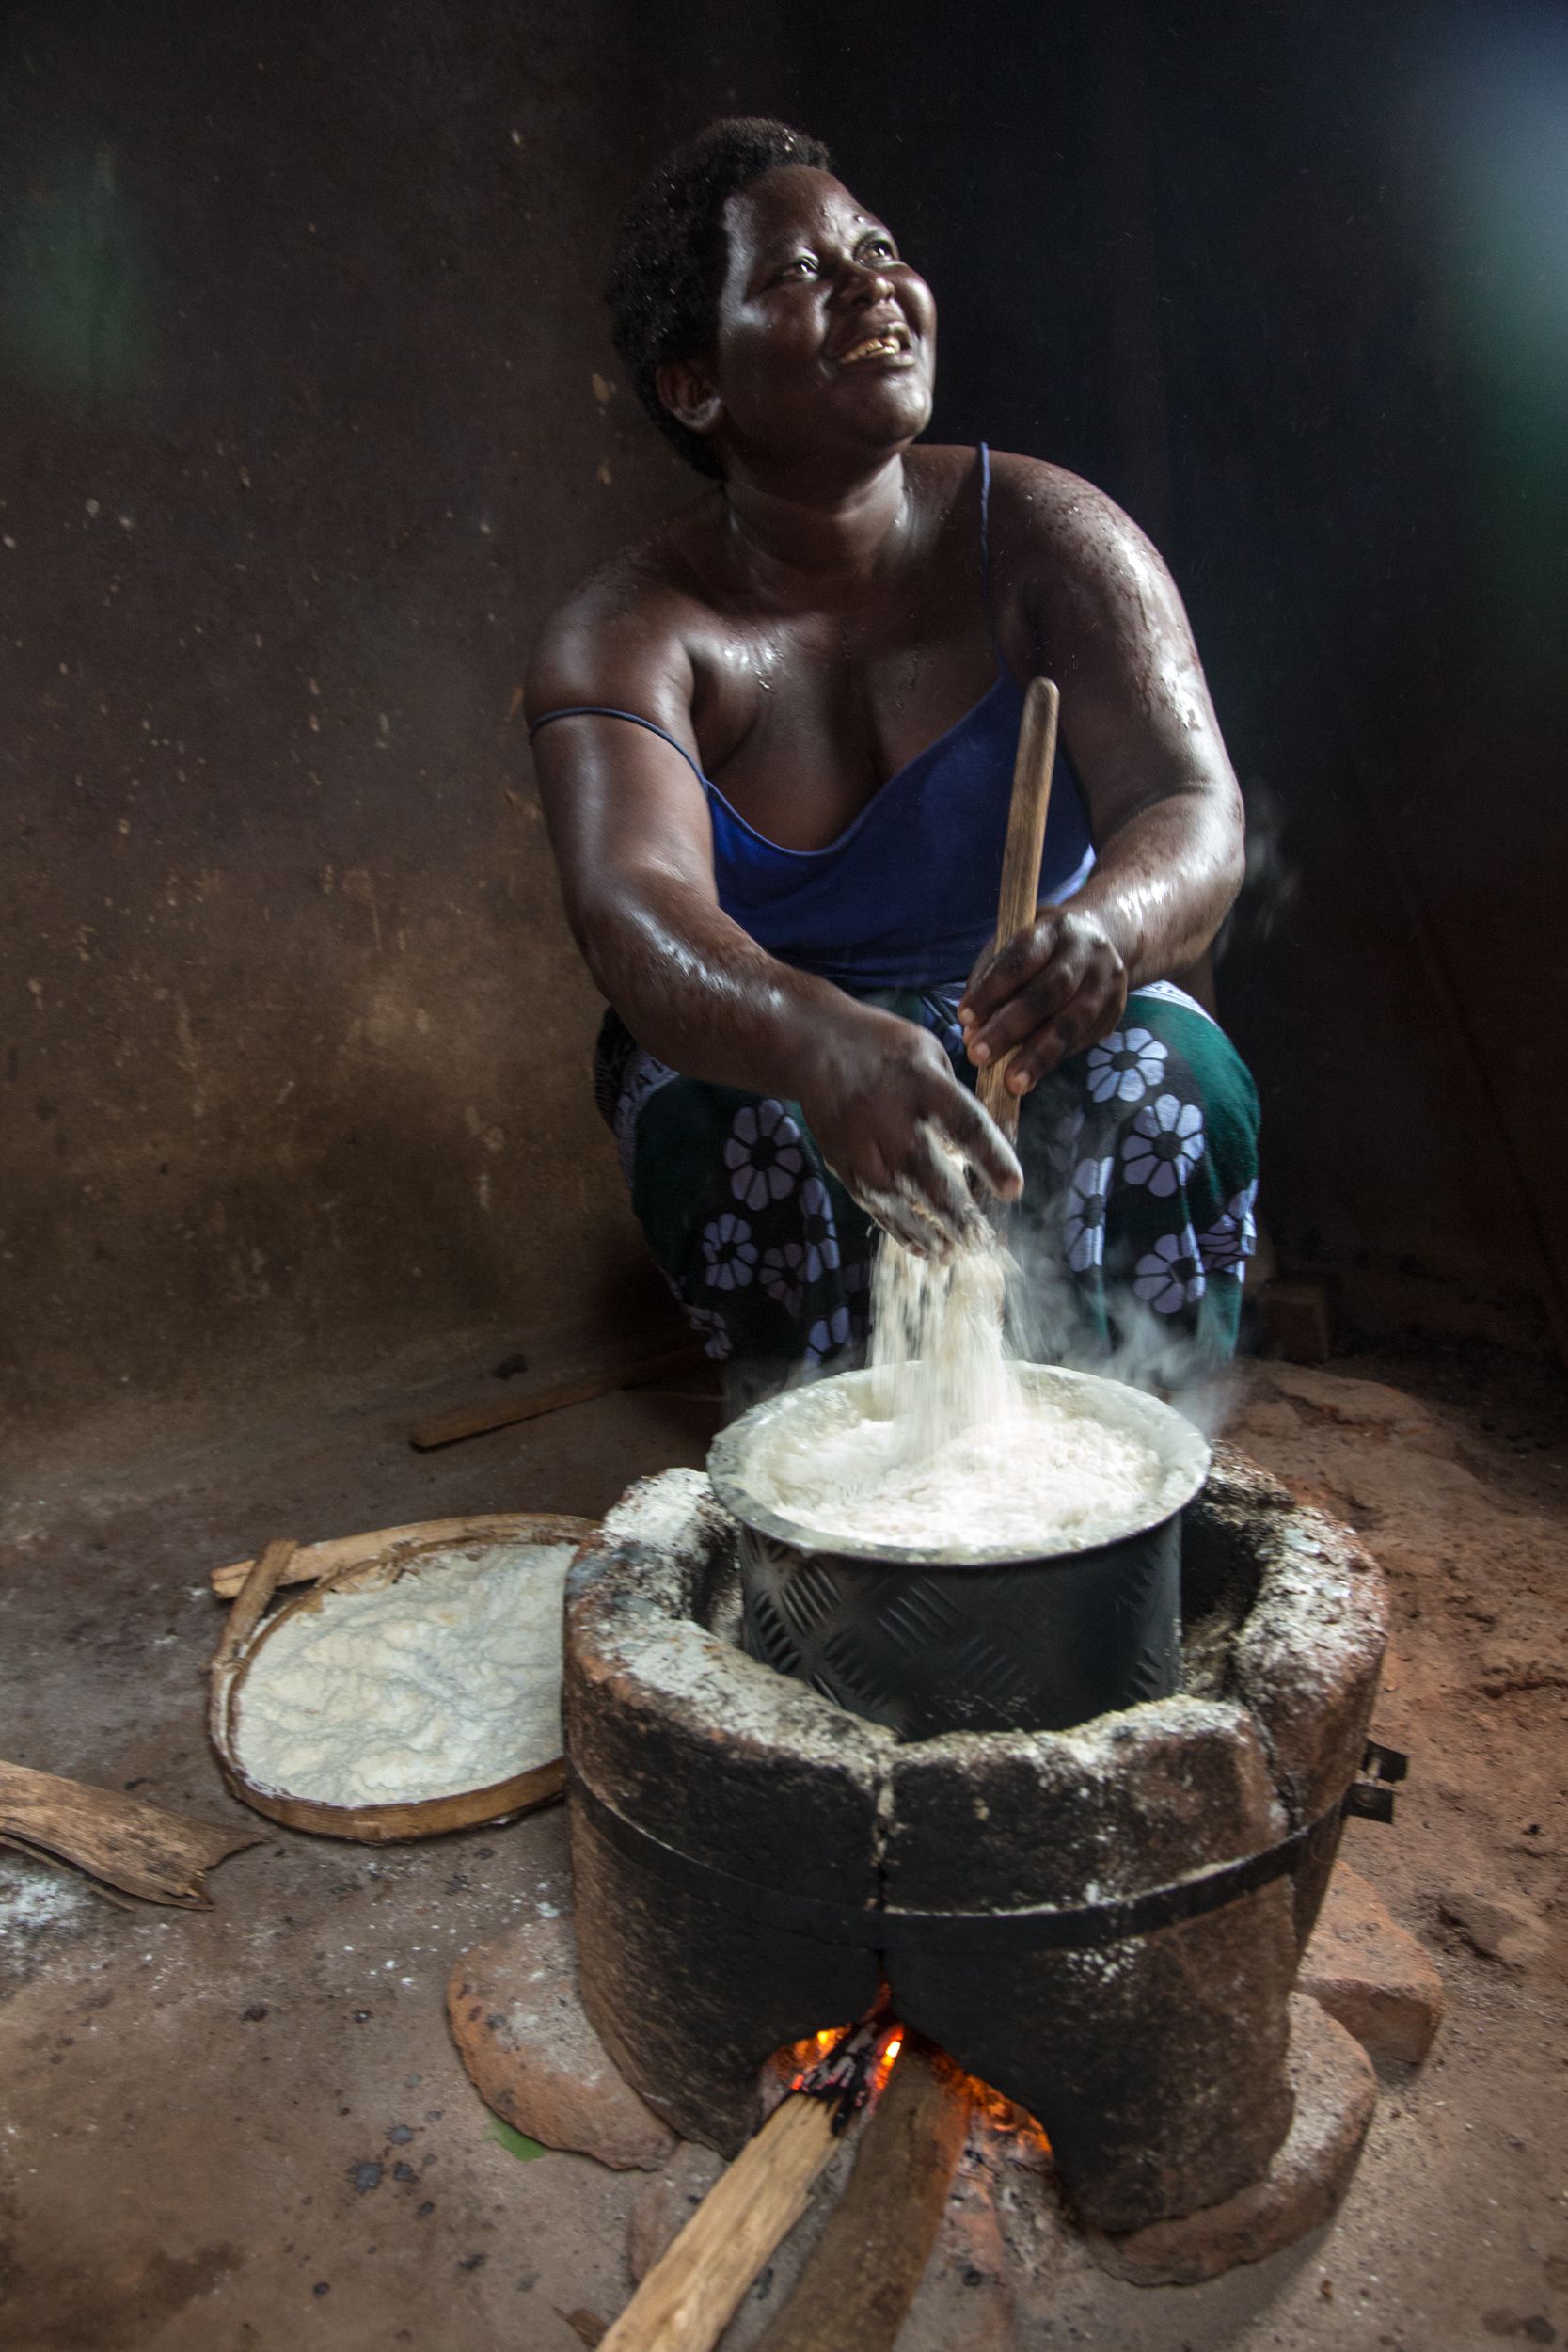 Rose Kandodo from Nessa village cooking nsima on an improved cook stove. Compared to open fire, the stove uses only half the wood and smokes less. Image by Nathalie Bertrams. Malawi, 2017.